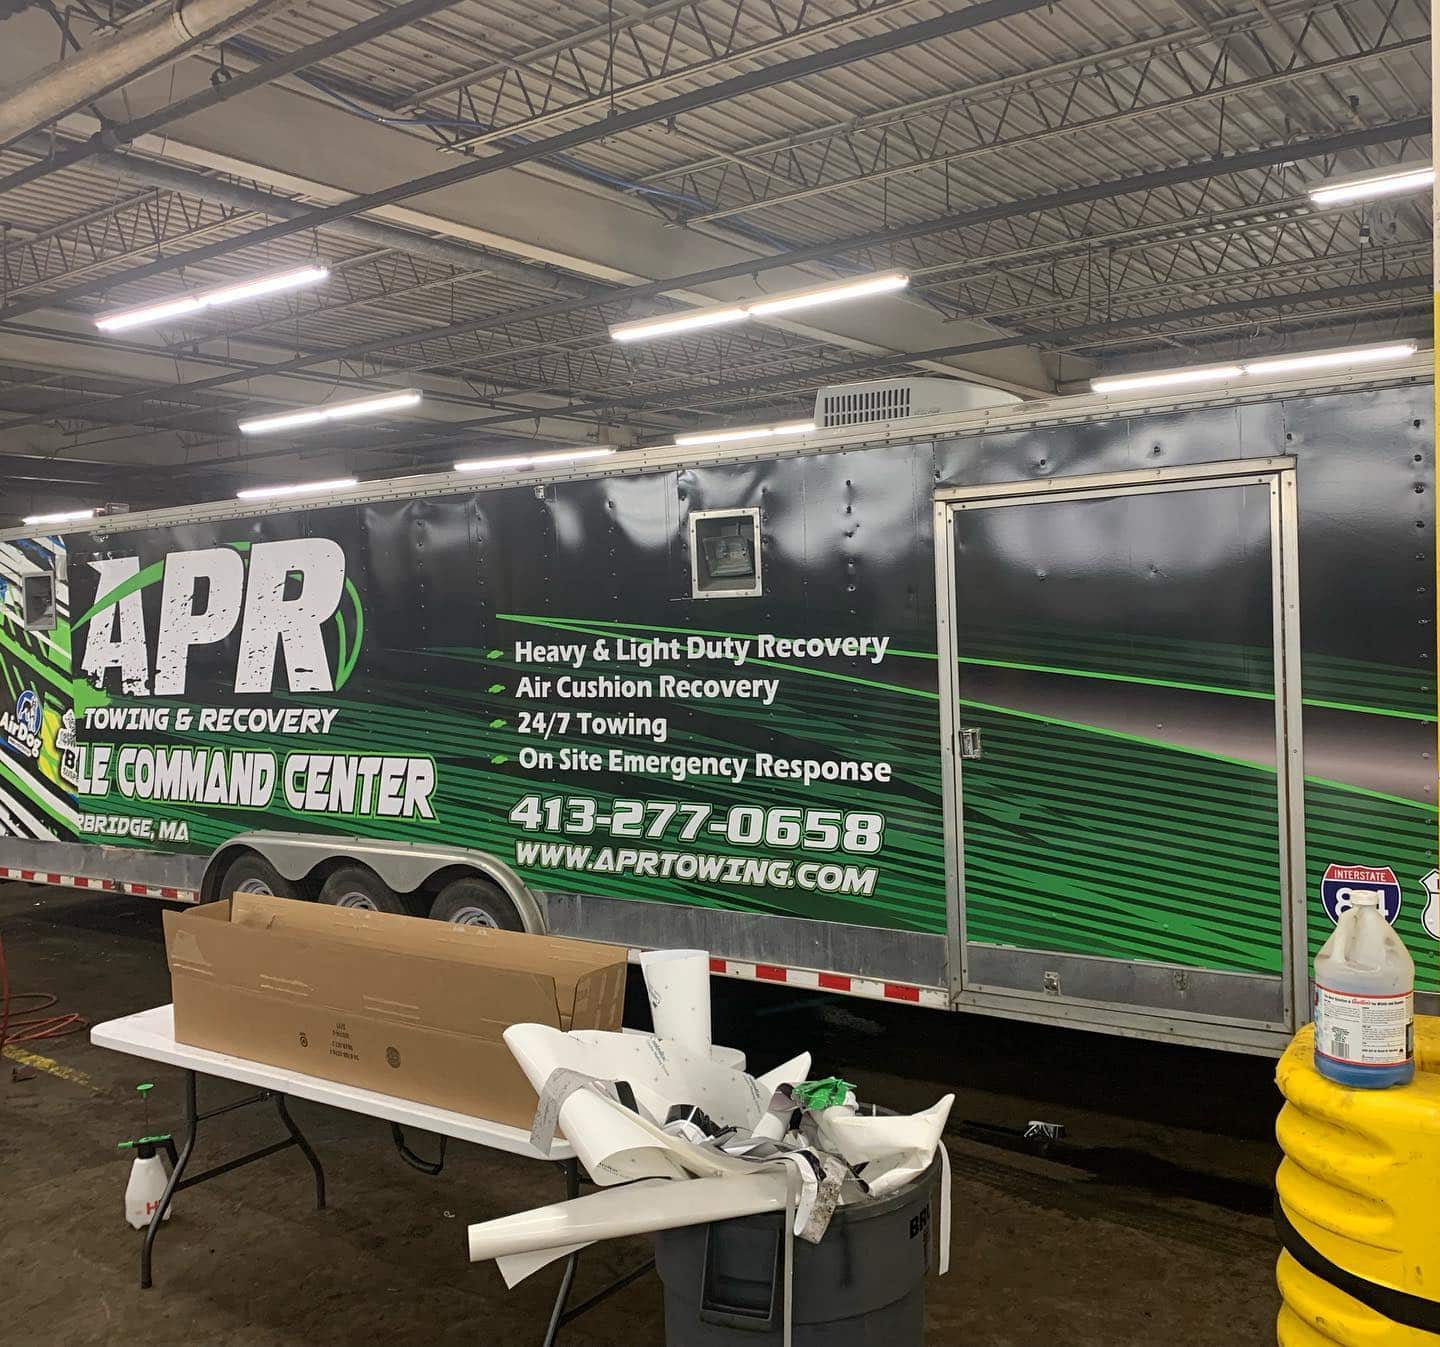 APR Towing & Recovery Mobile Command Center 4